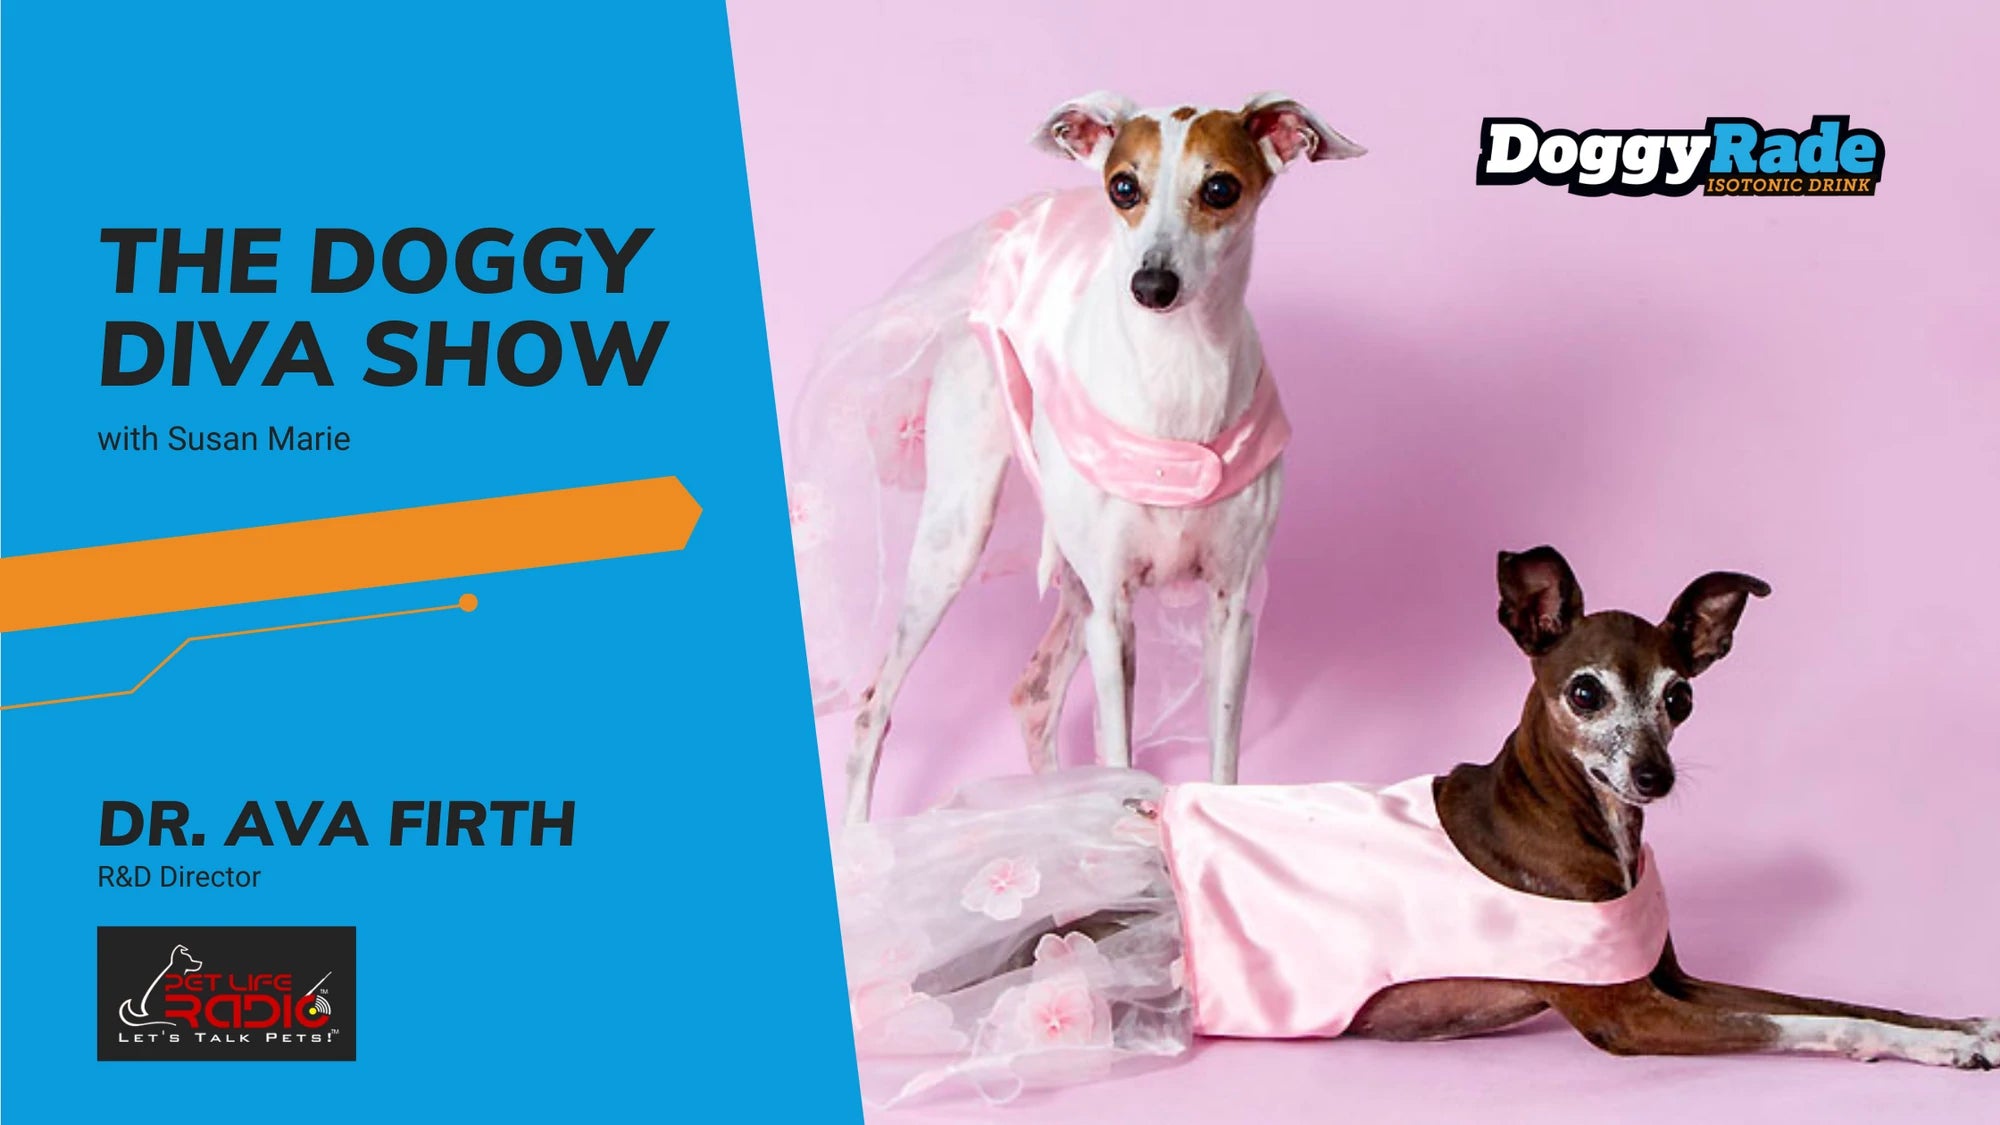 The DoggyDiva Show - Dr. Ava Firth, R&D Director